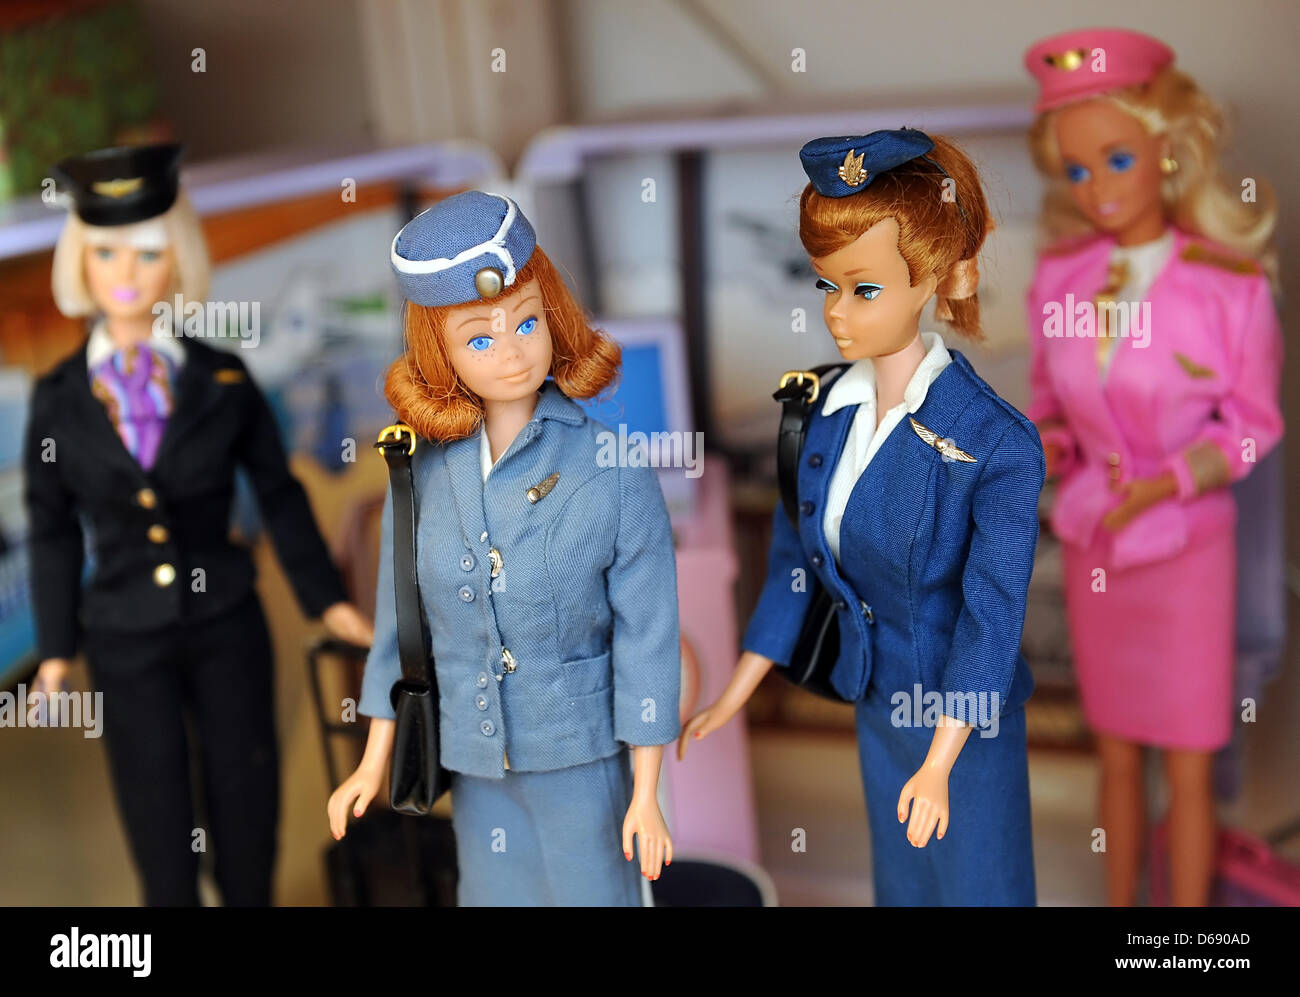 Flight Attendant Barbies and Pilot Barbie are on display at the city museum 'Alte Burg' in Wittenberge, Germany, 26 January 2012. The tavelling exhibition 'Busy Girl - Barbie's Career' documents women's history of the last 50 years with the help of Barbie dolls. They show the development Barbie as a homemmaker to Barbie as a business woman, showing how Barbie always seems to embody Stock Photo